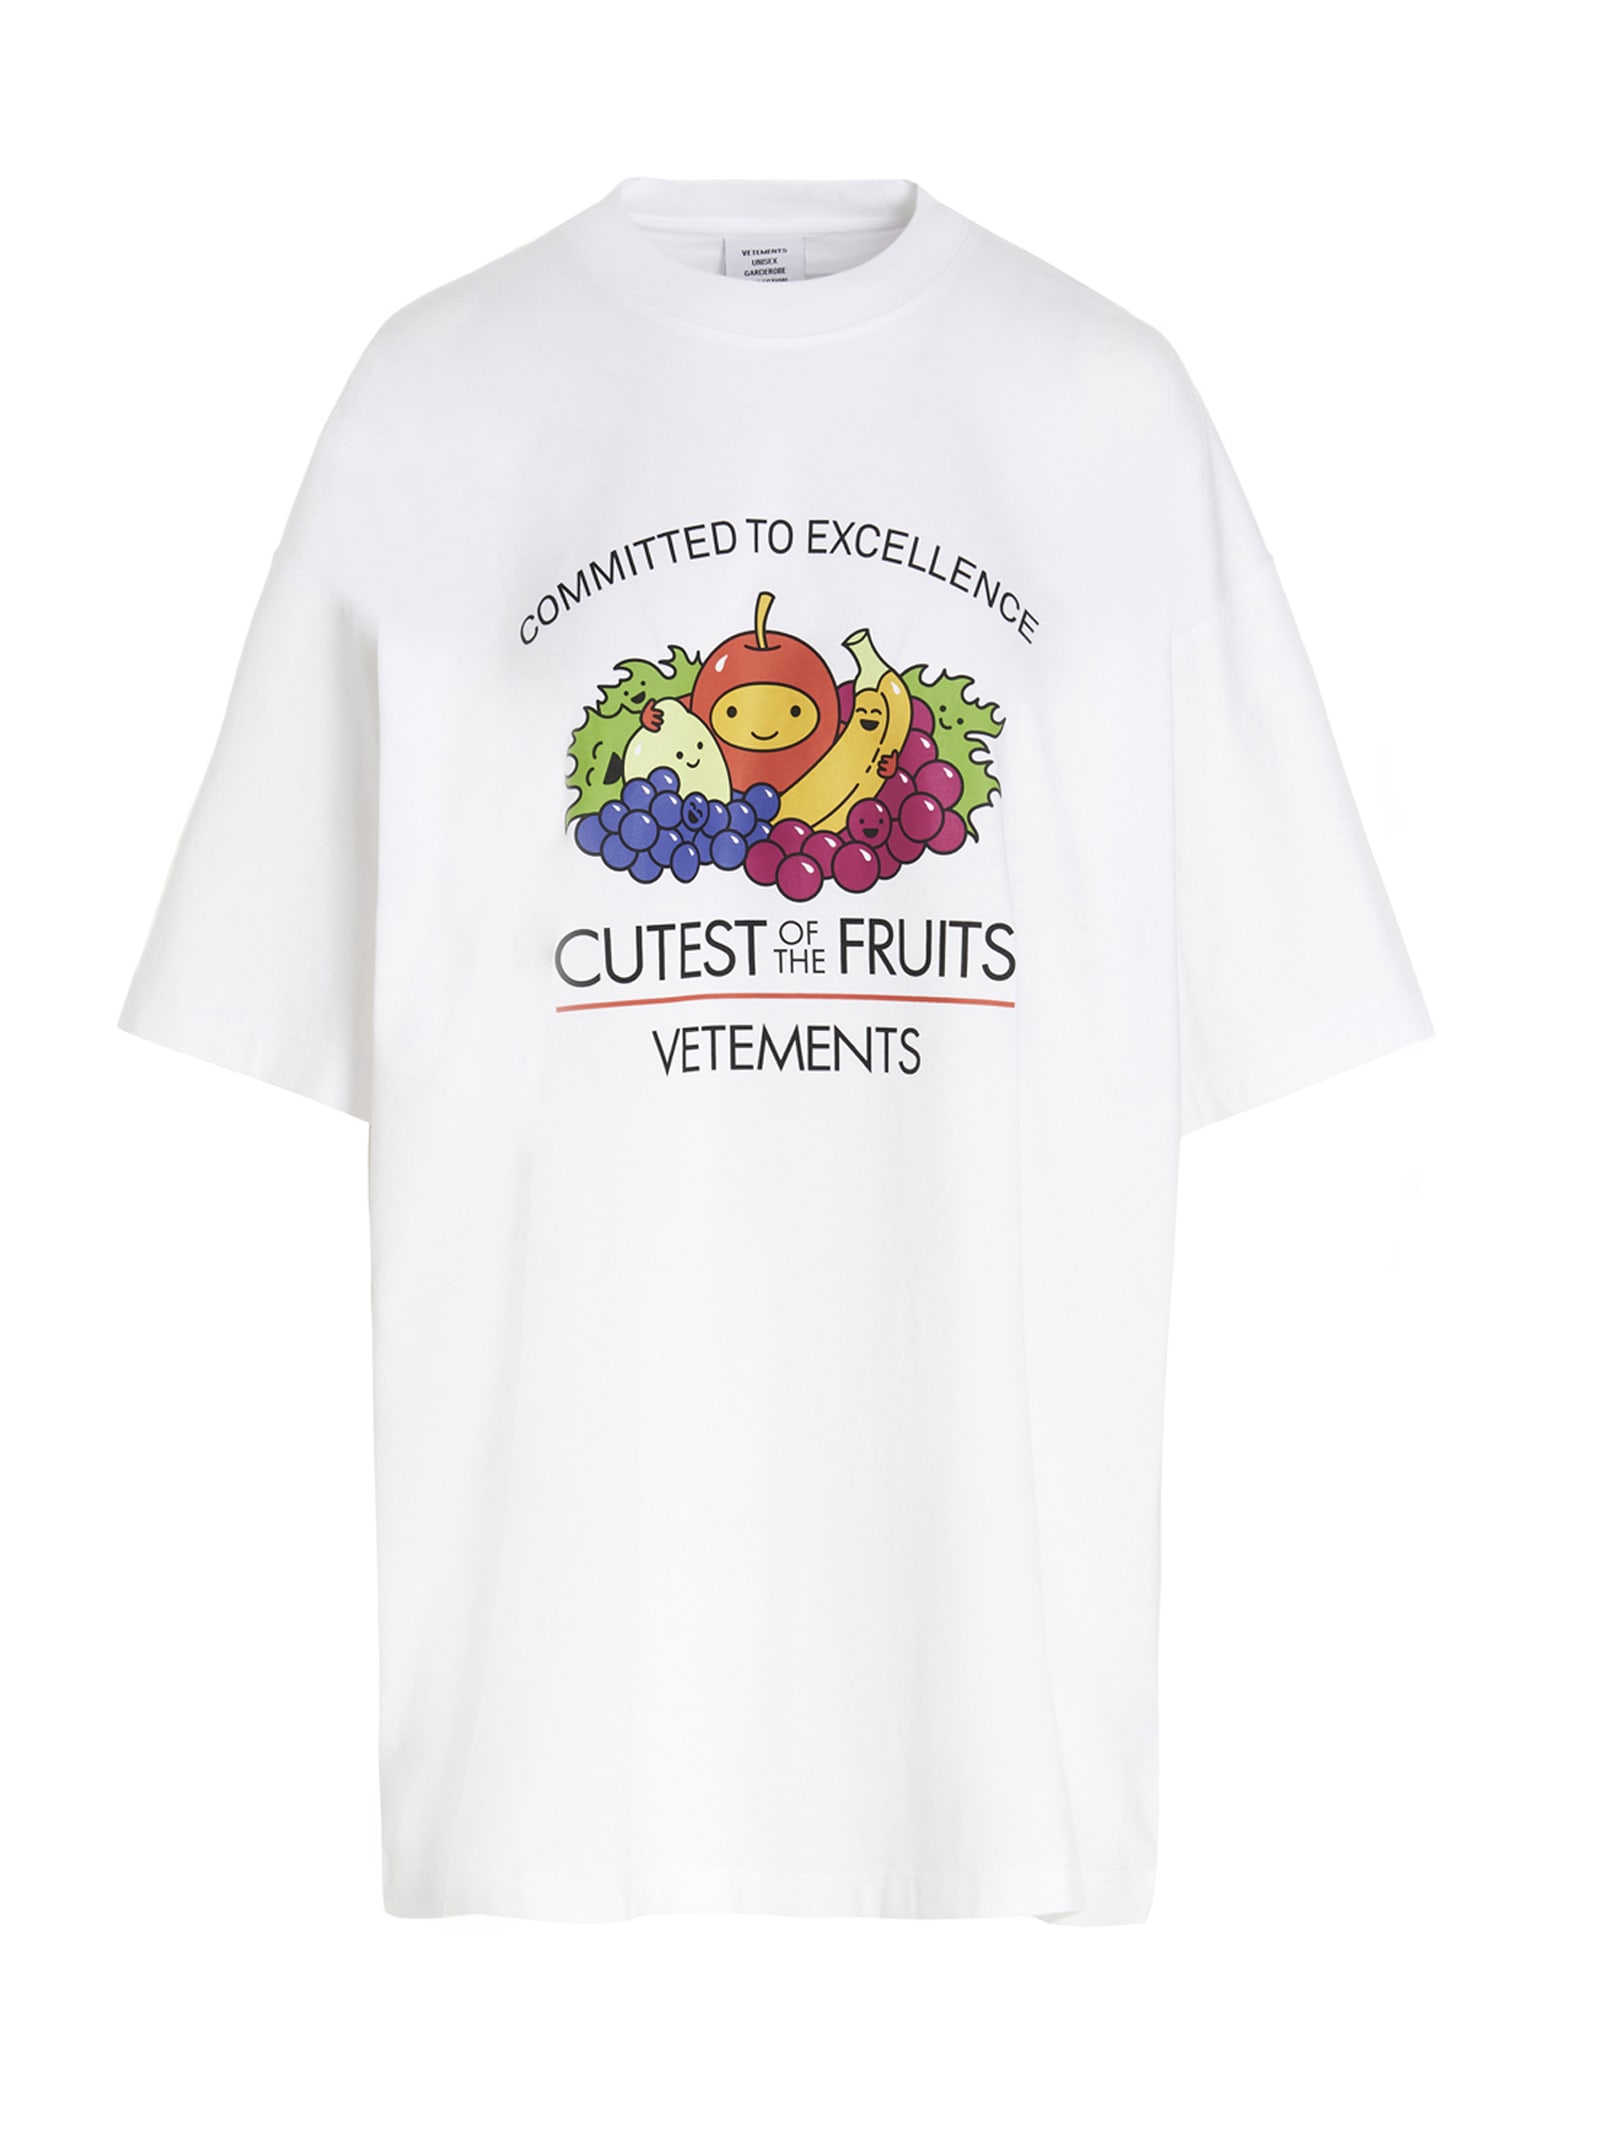 Vetements cutest Of The Fruits T-shirt